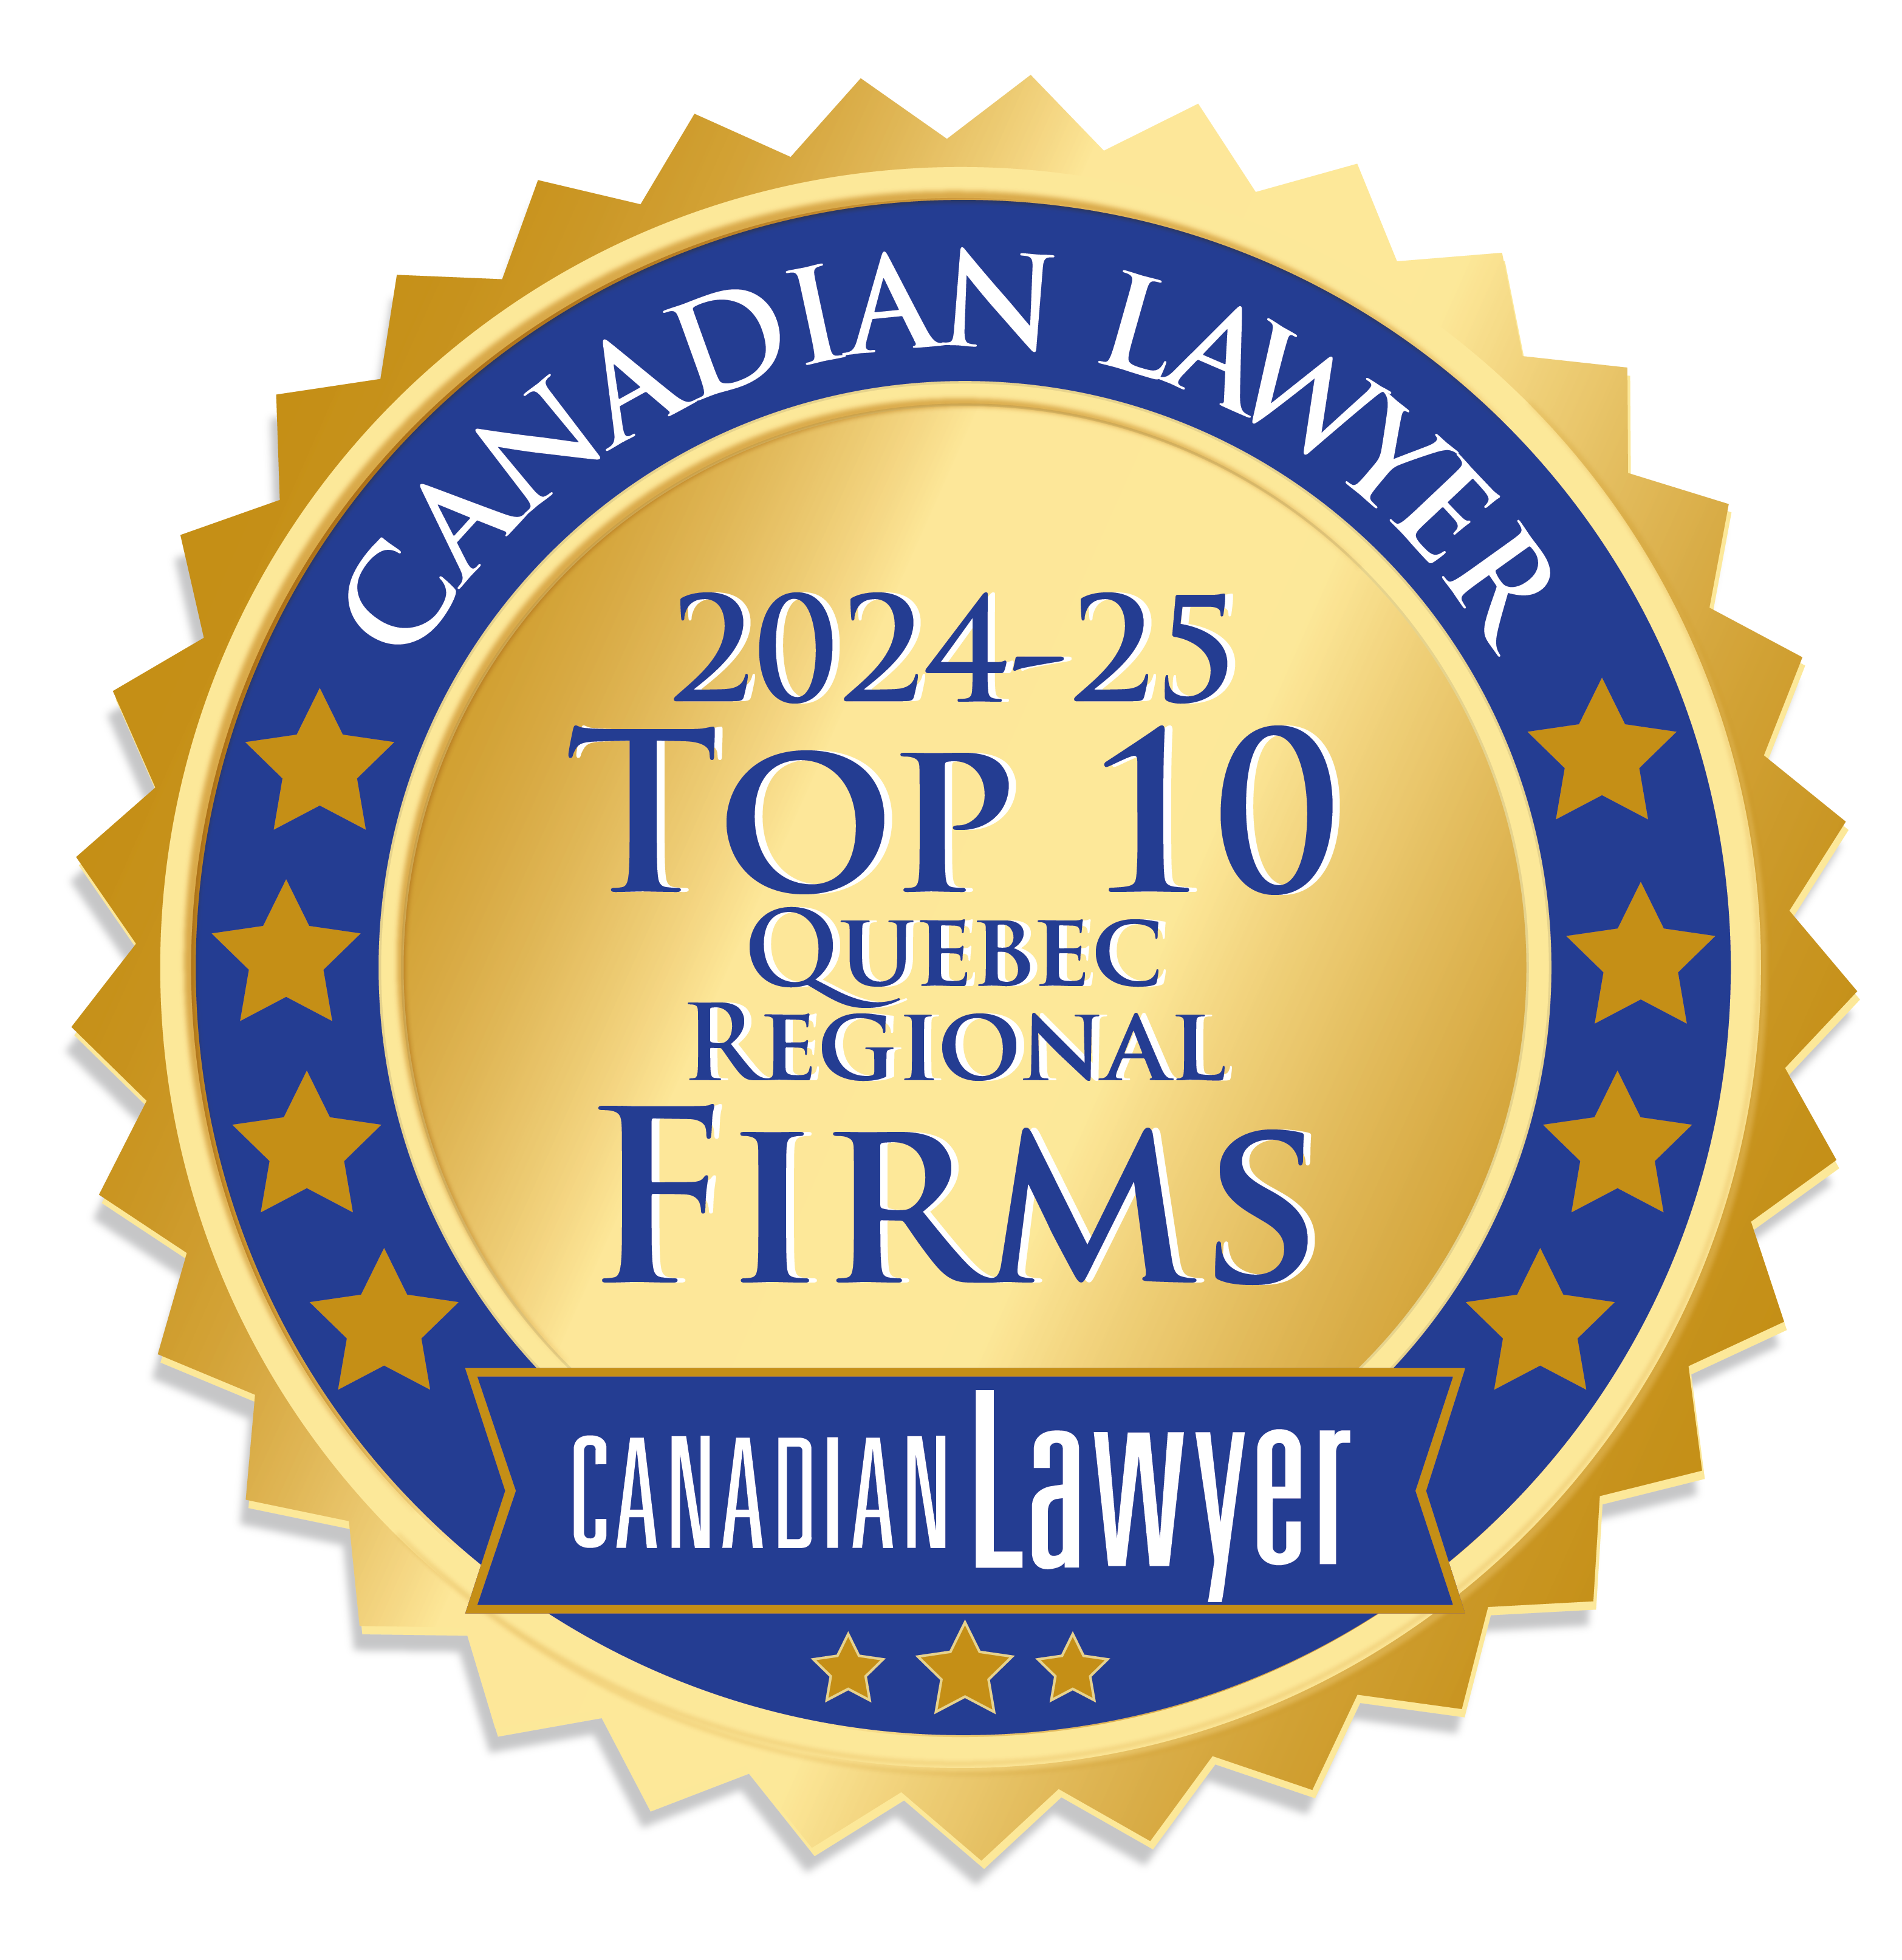 The Top 10 Law Firms in Quebec